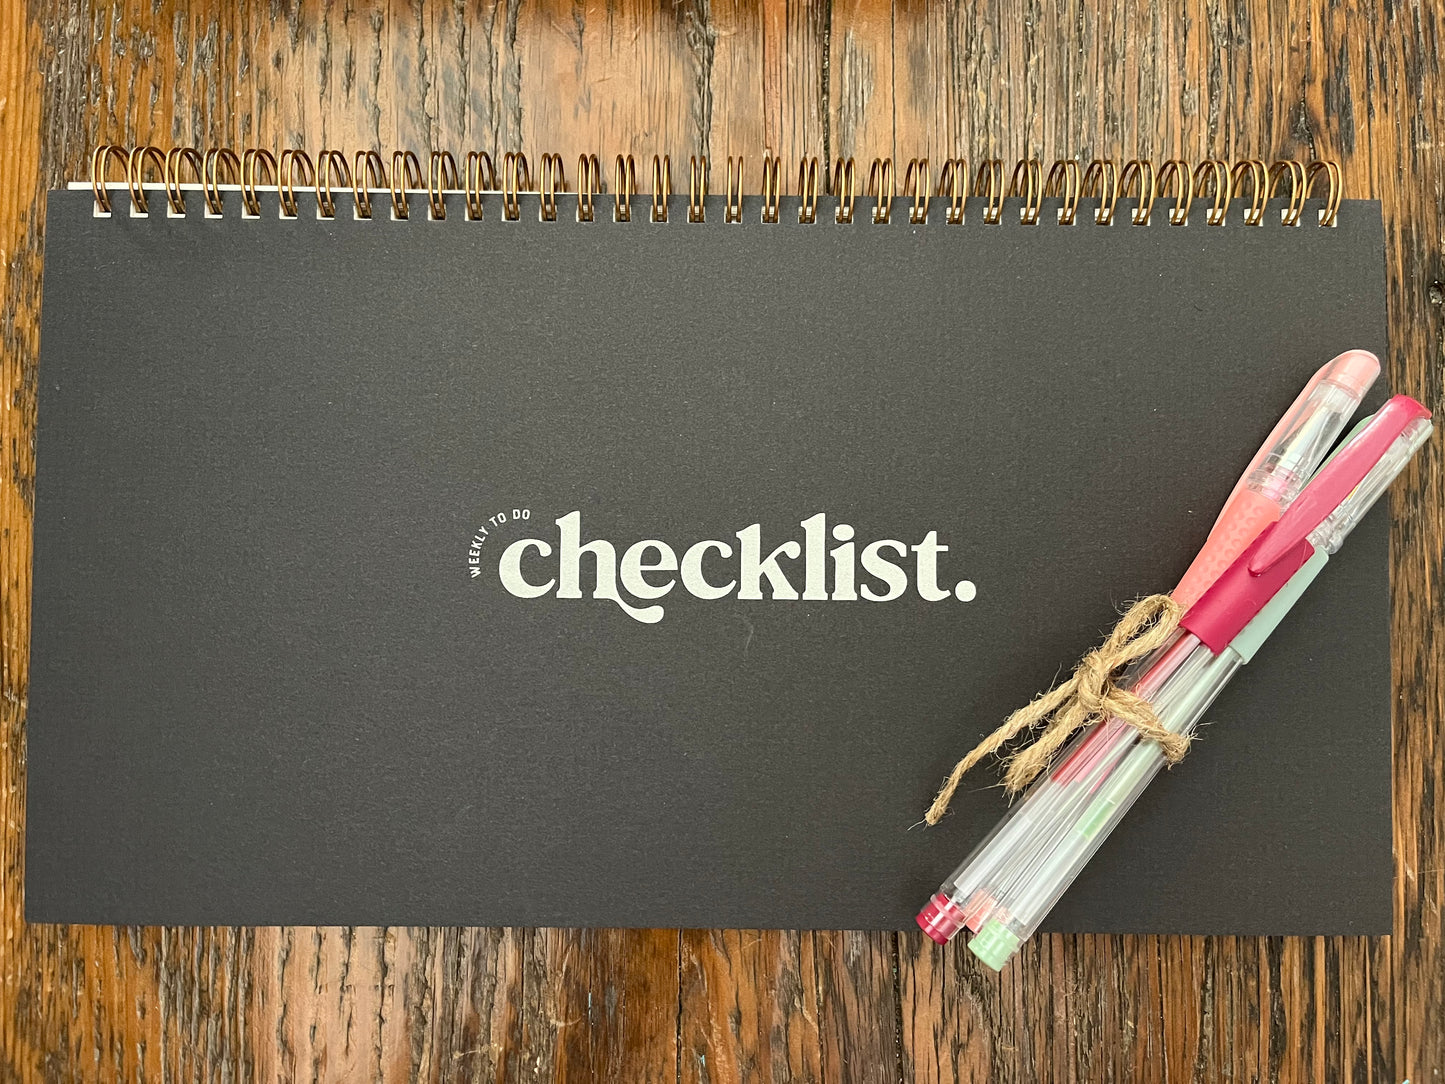 Weekly To Do Checklist Planner Stationary Set + FREE Gift!